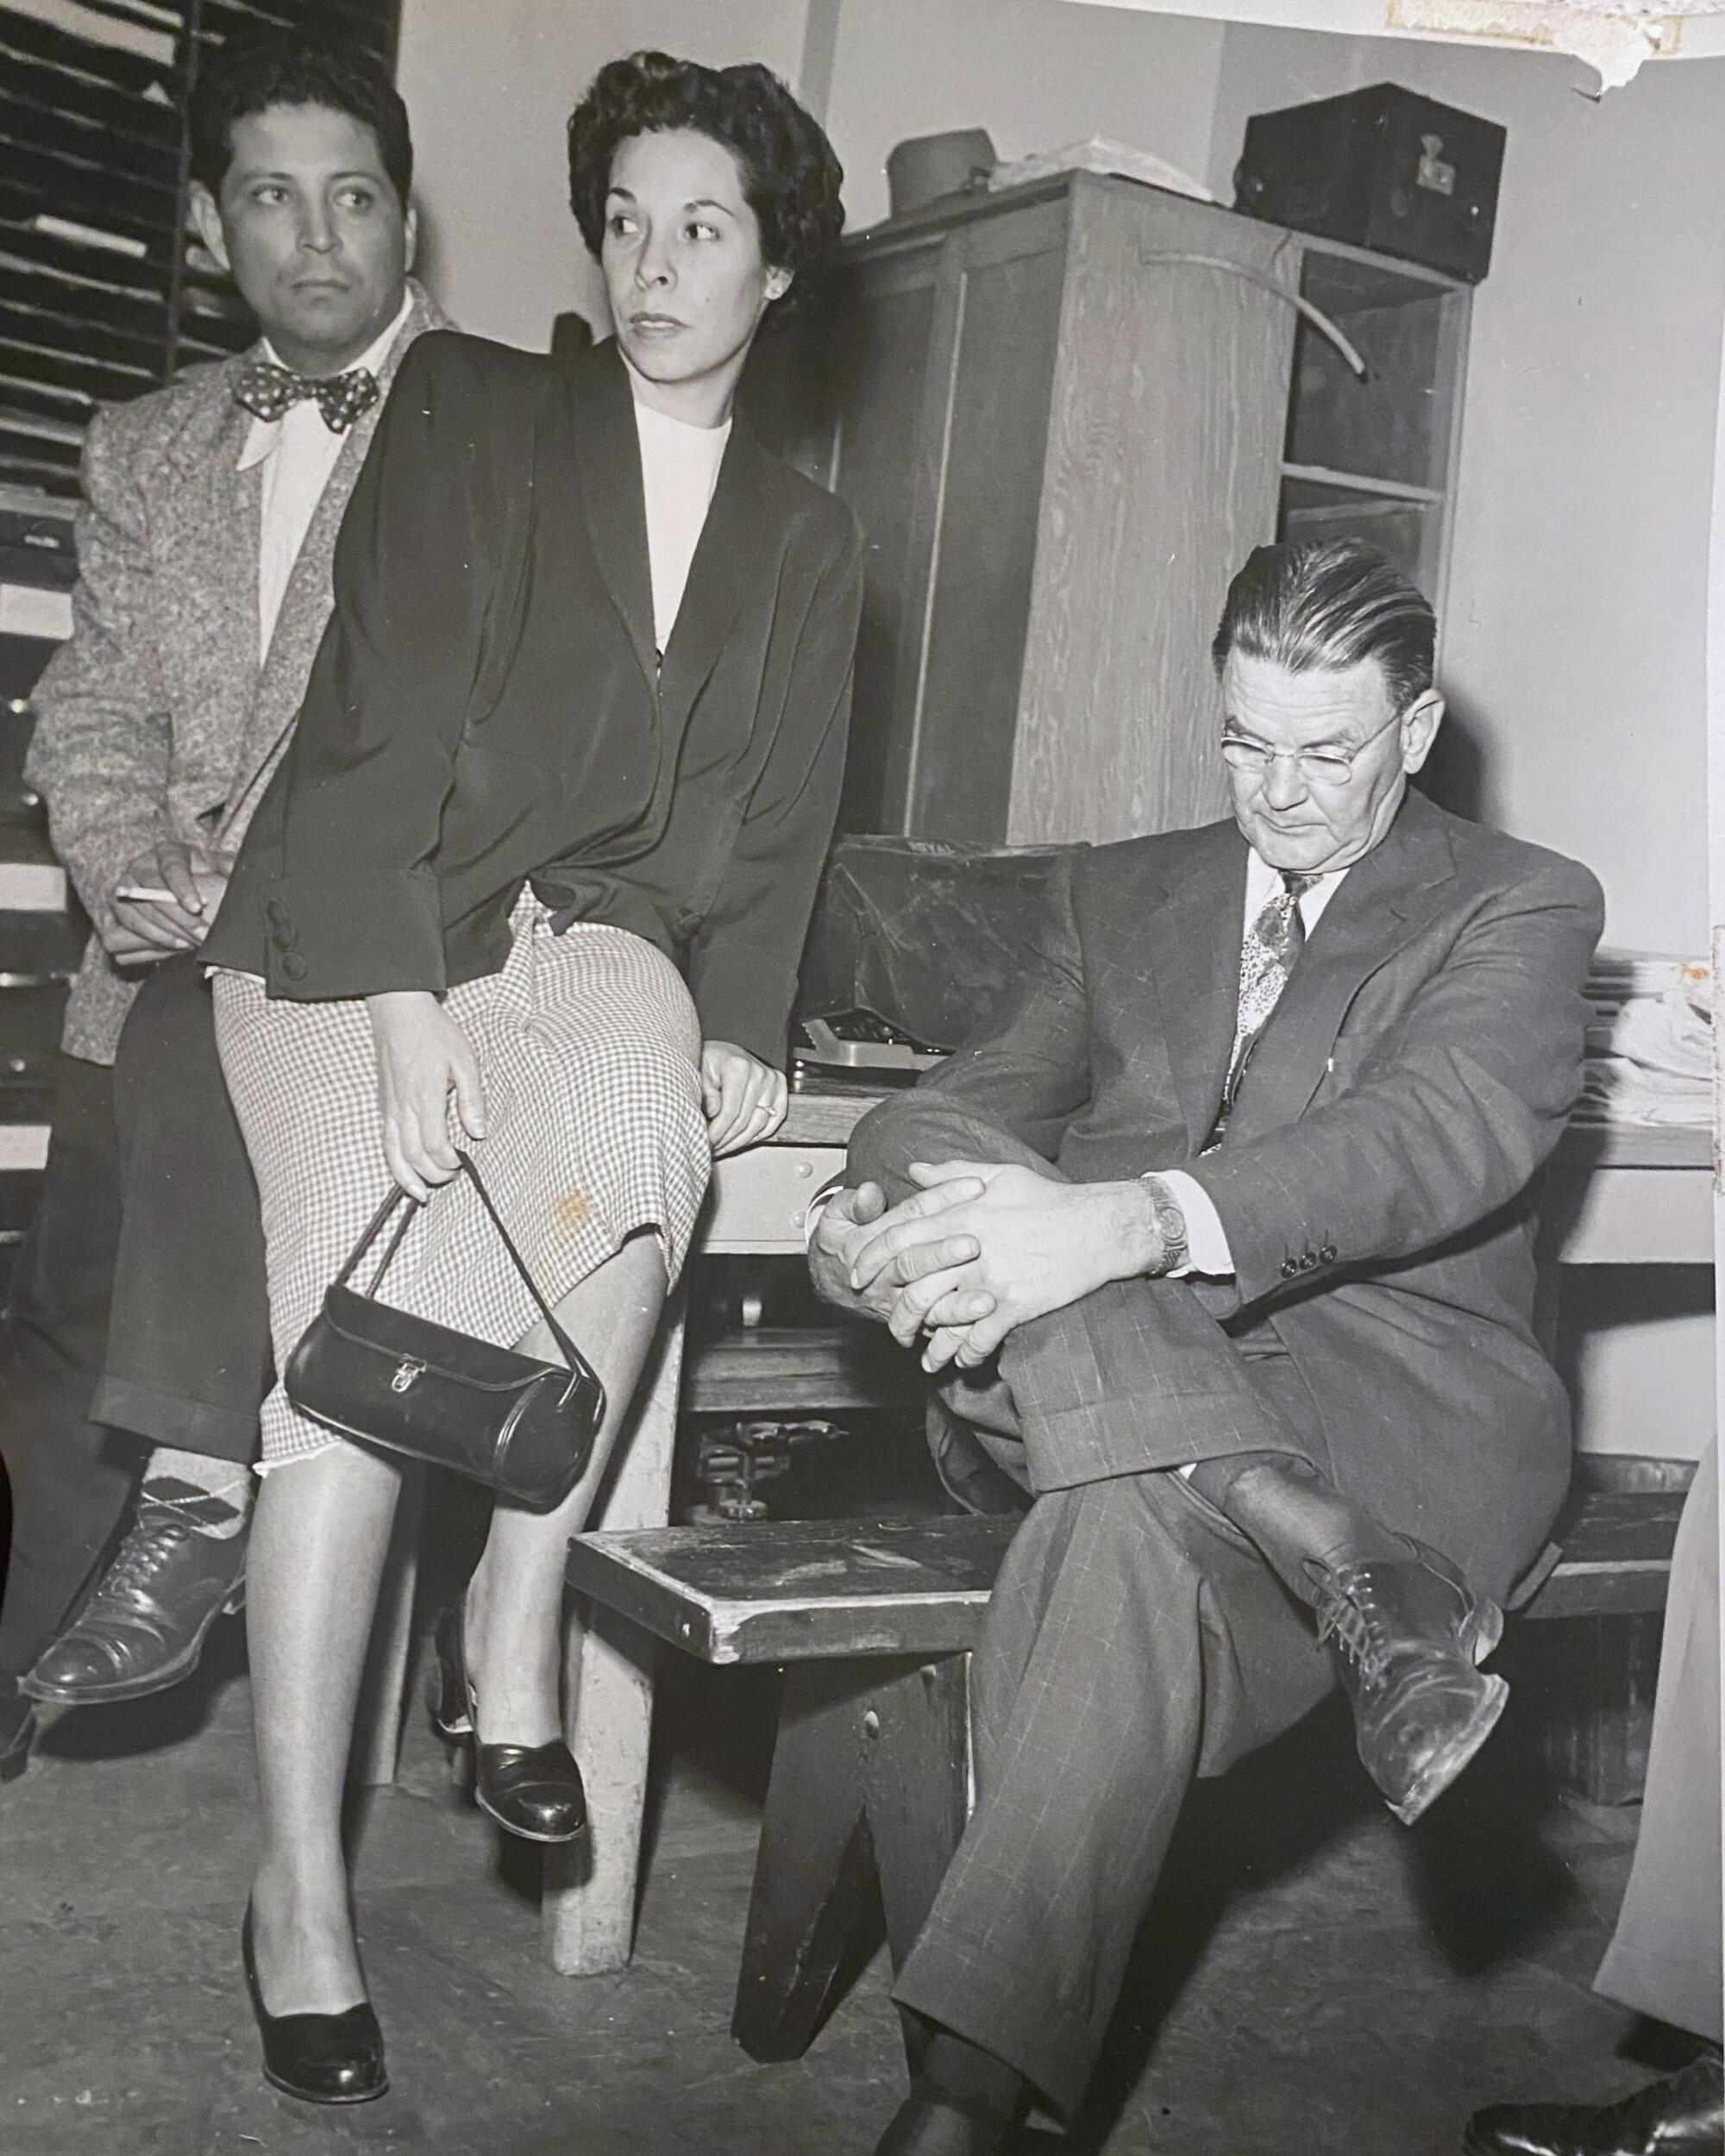 Three people at a table. A man in bowtie and suit, a woman with dark hair, blazer and skirt, a man in suit looking downward.